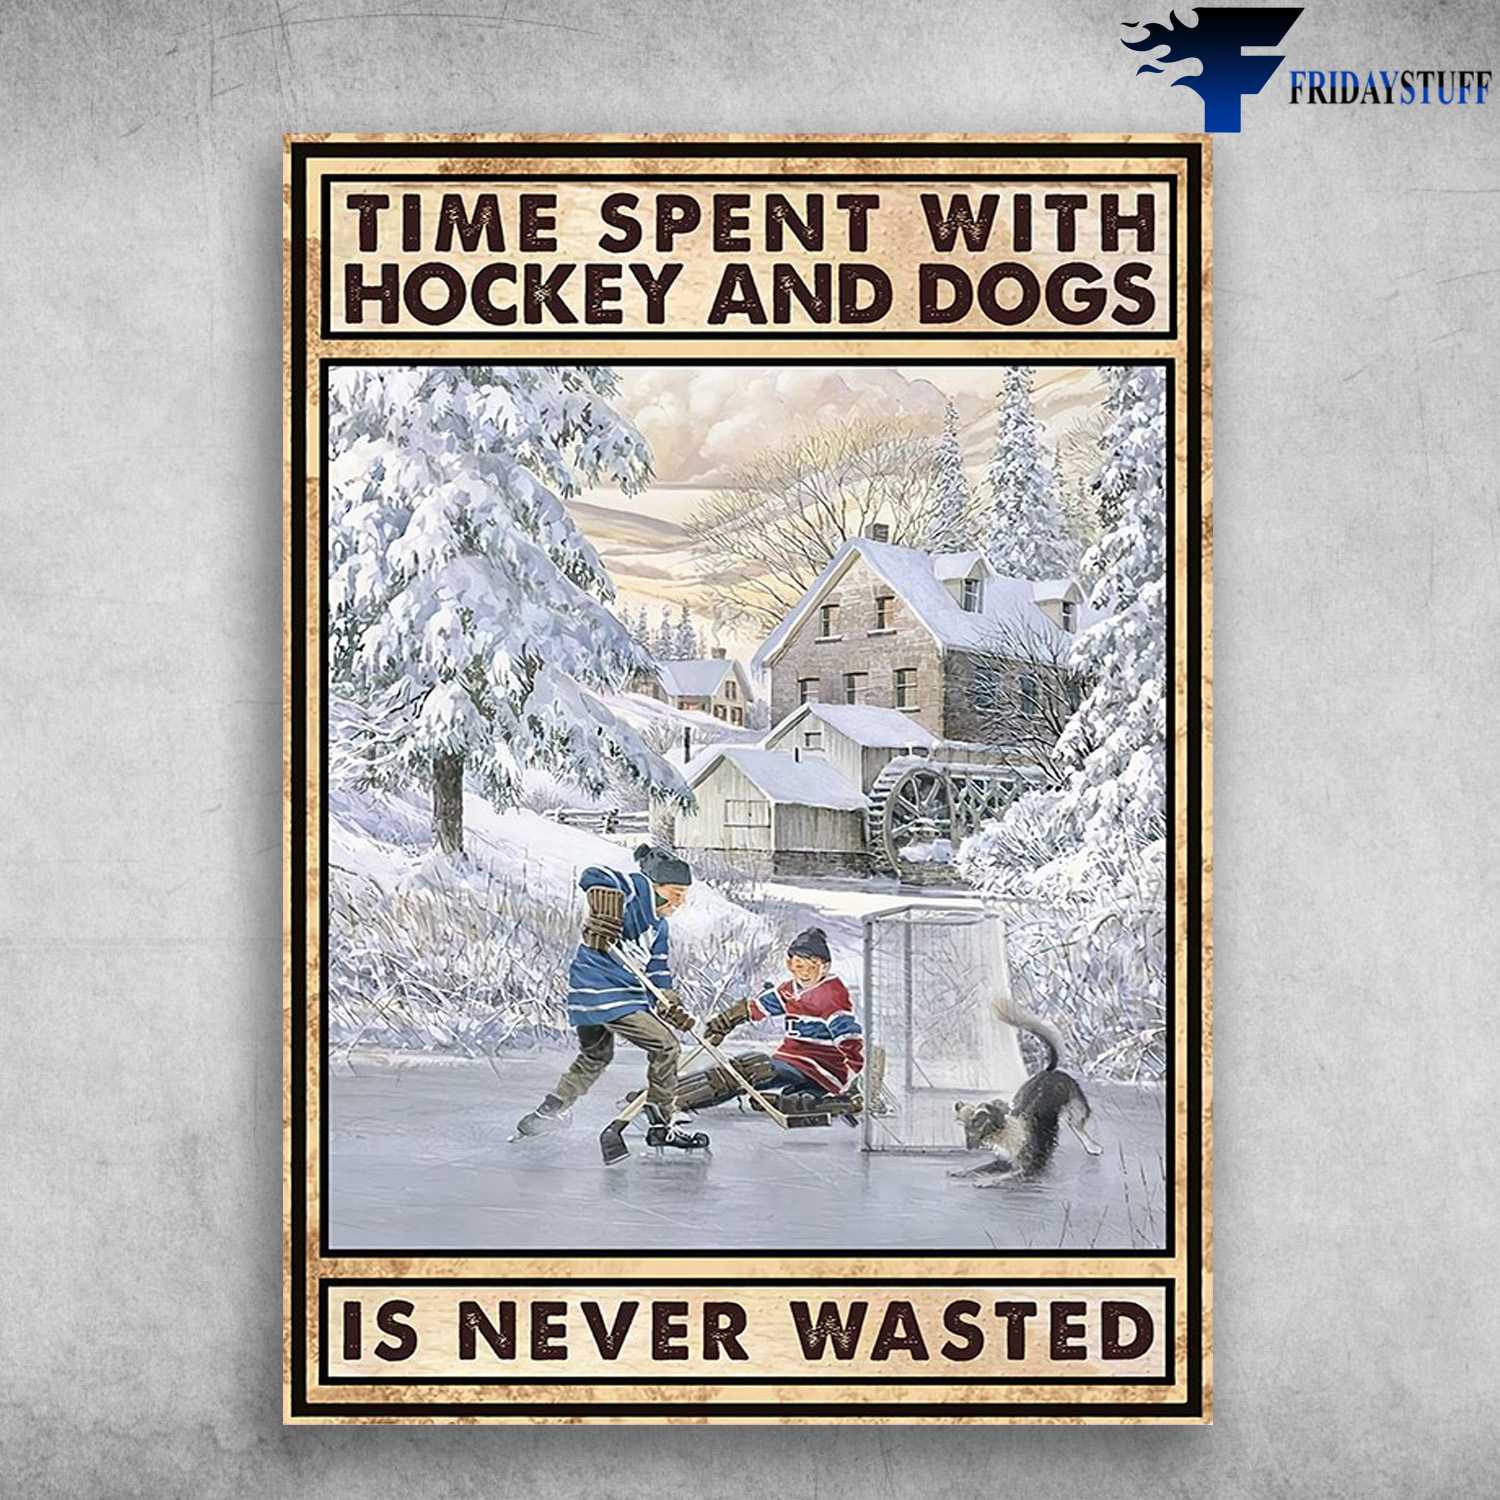 Ice Hockey With Dog - Time Spent With, Hockey And Dogs, Is Never Wasted